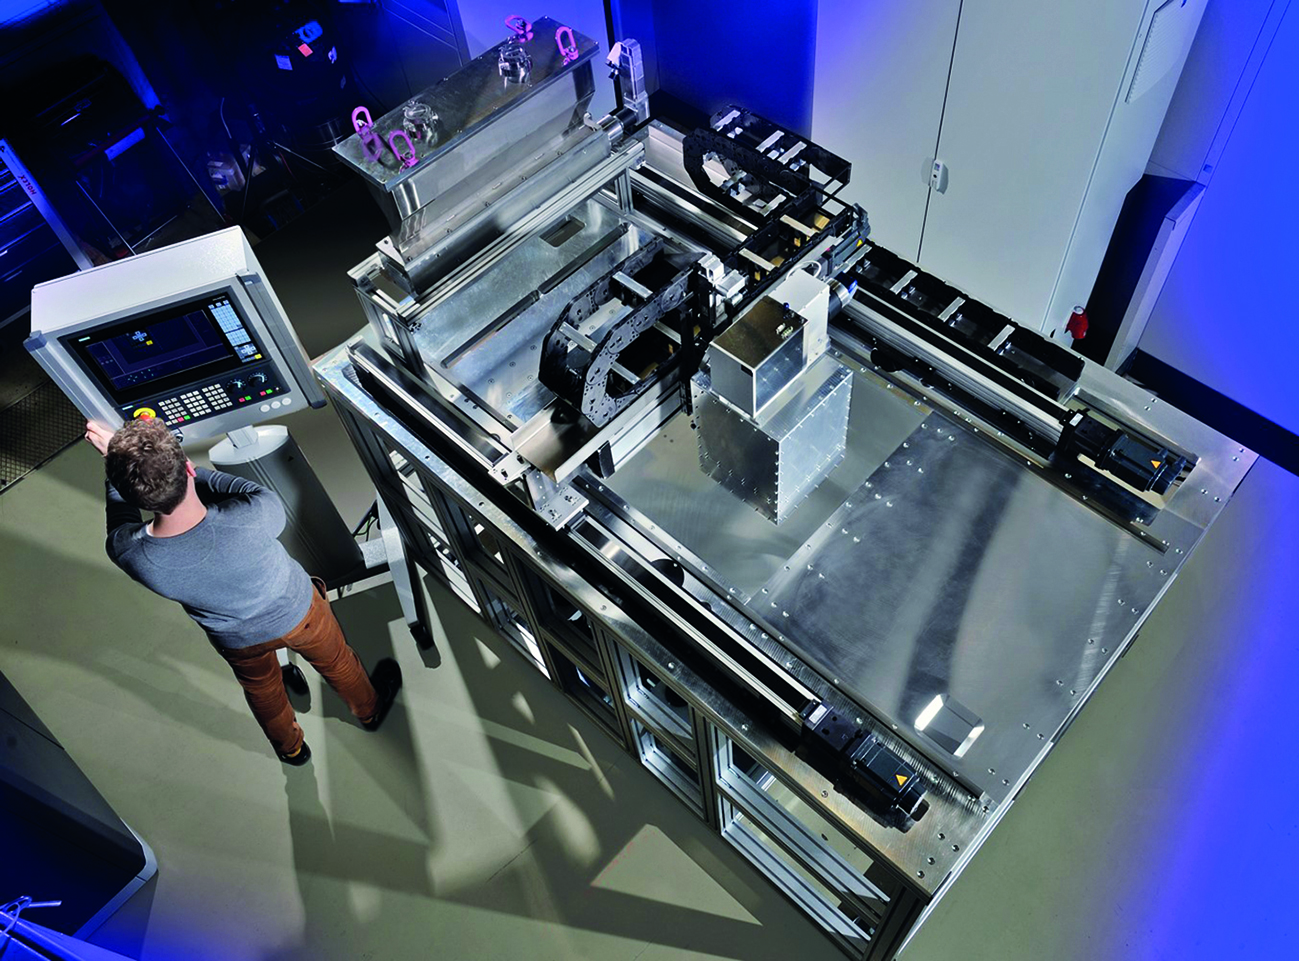 With a laboratory system, Fraunhofer ILT is further developing SLM into a 3D printing technology for large metal components. (machine housing not shown).